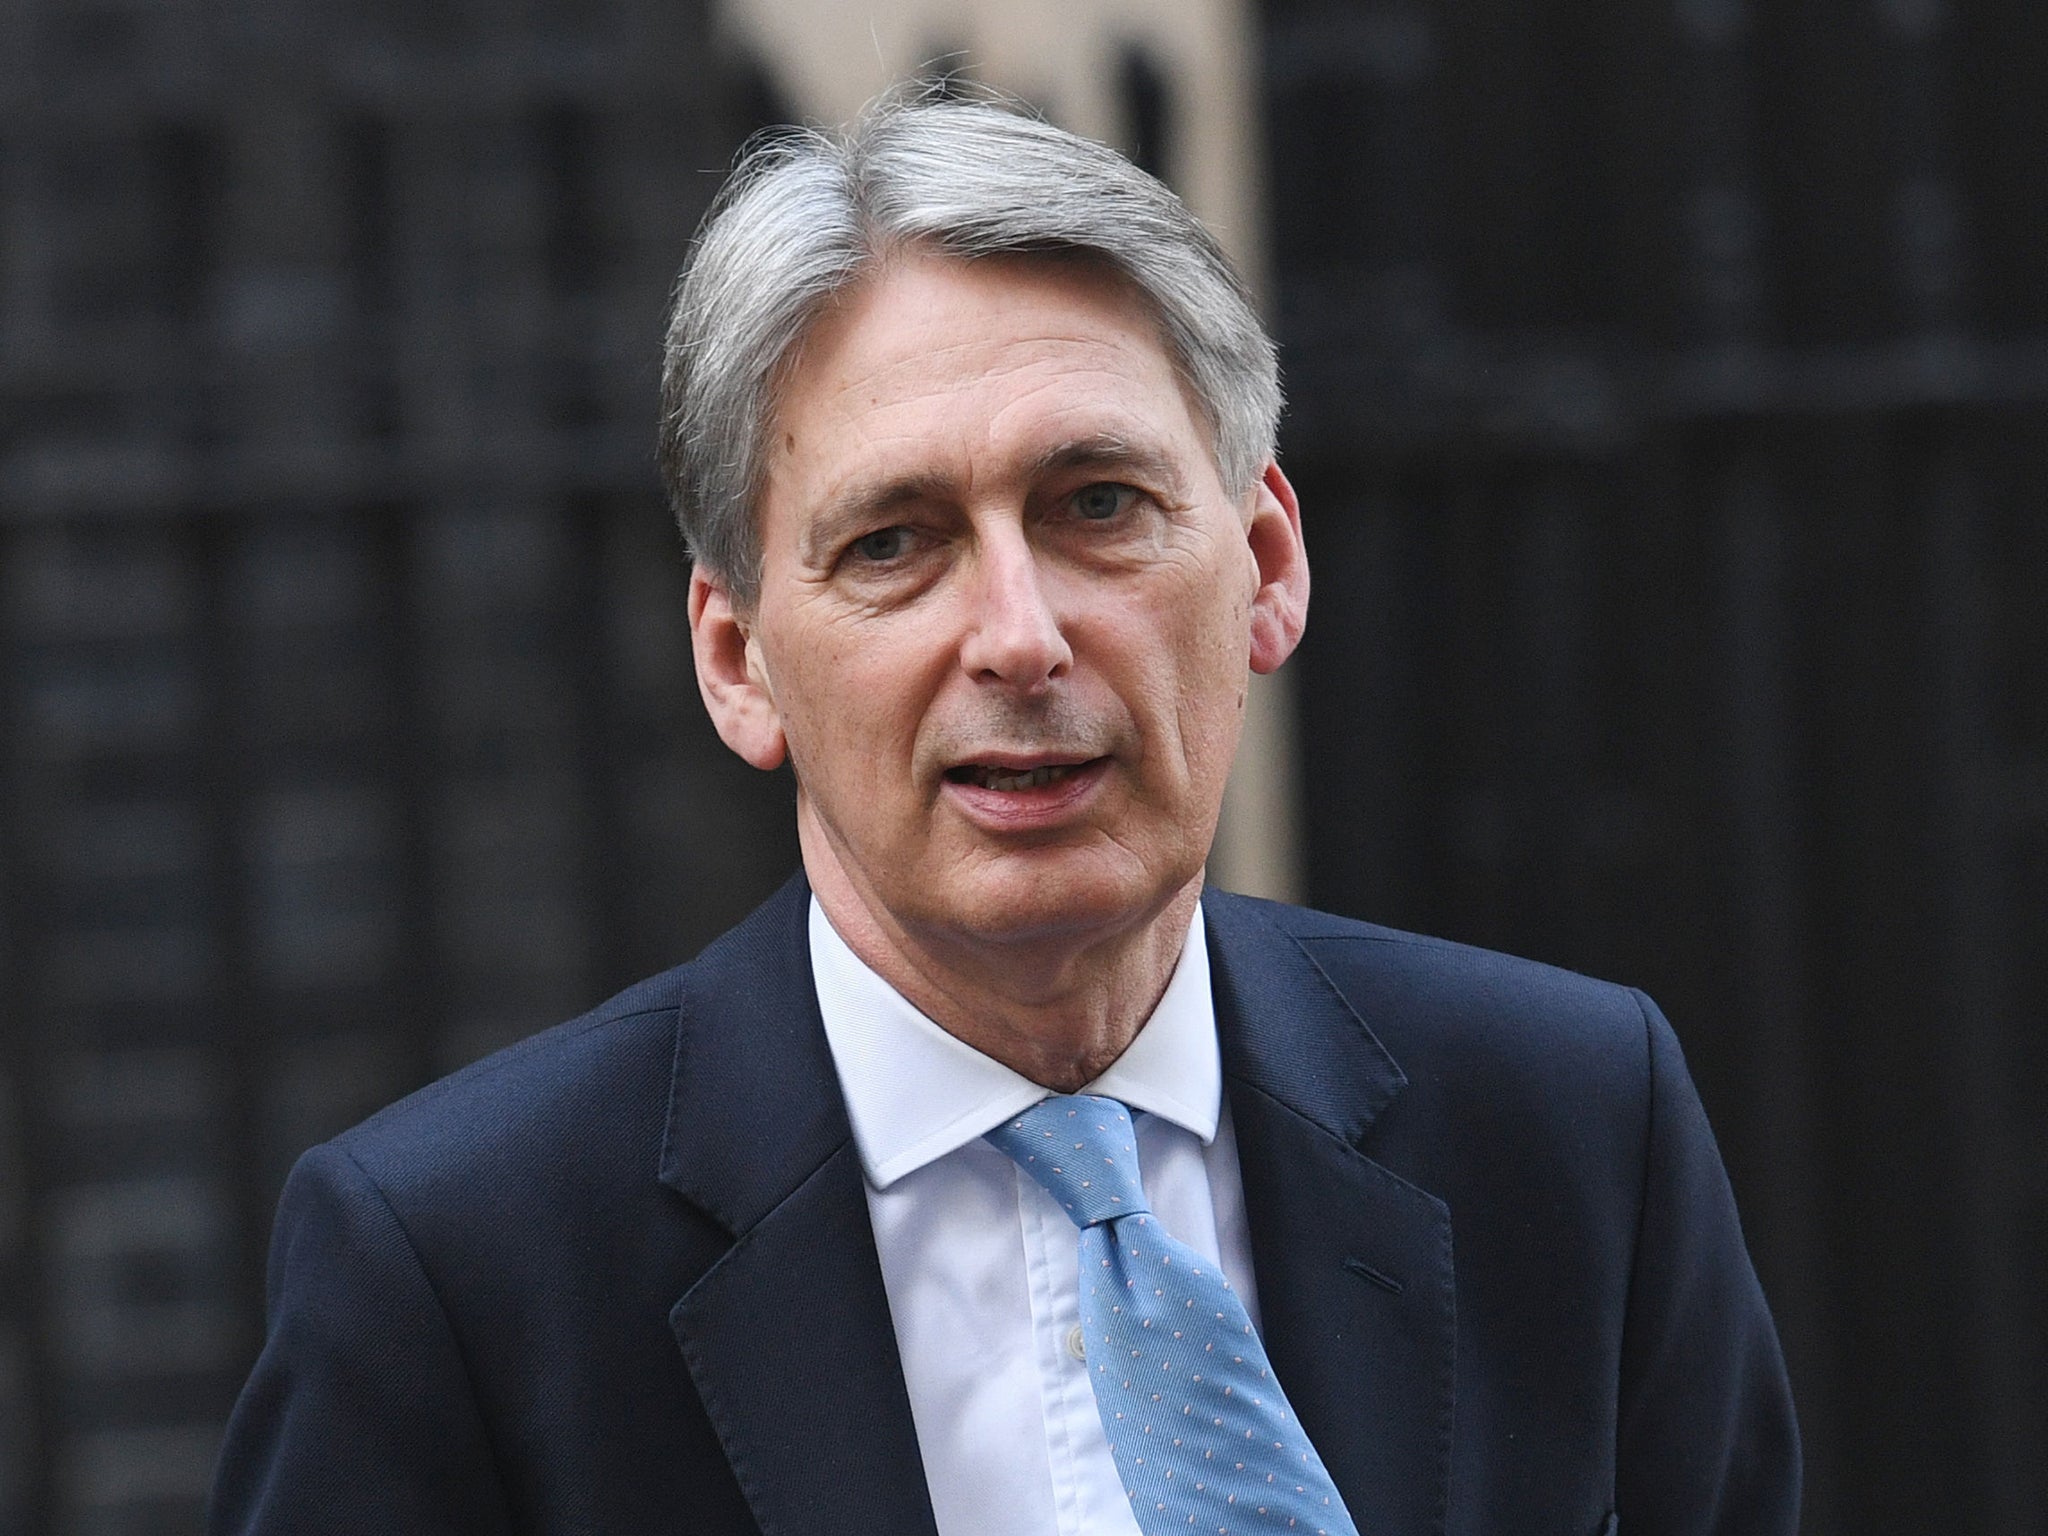 Philip Hammond wants to continue with his spending plans despite the public disaffection with austerity